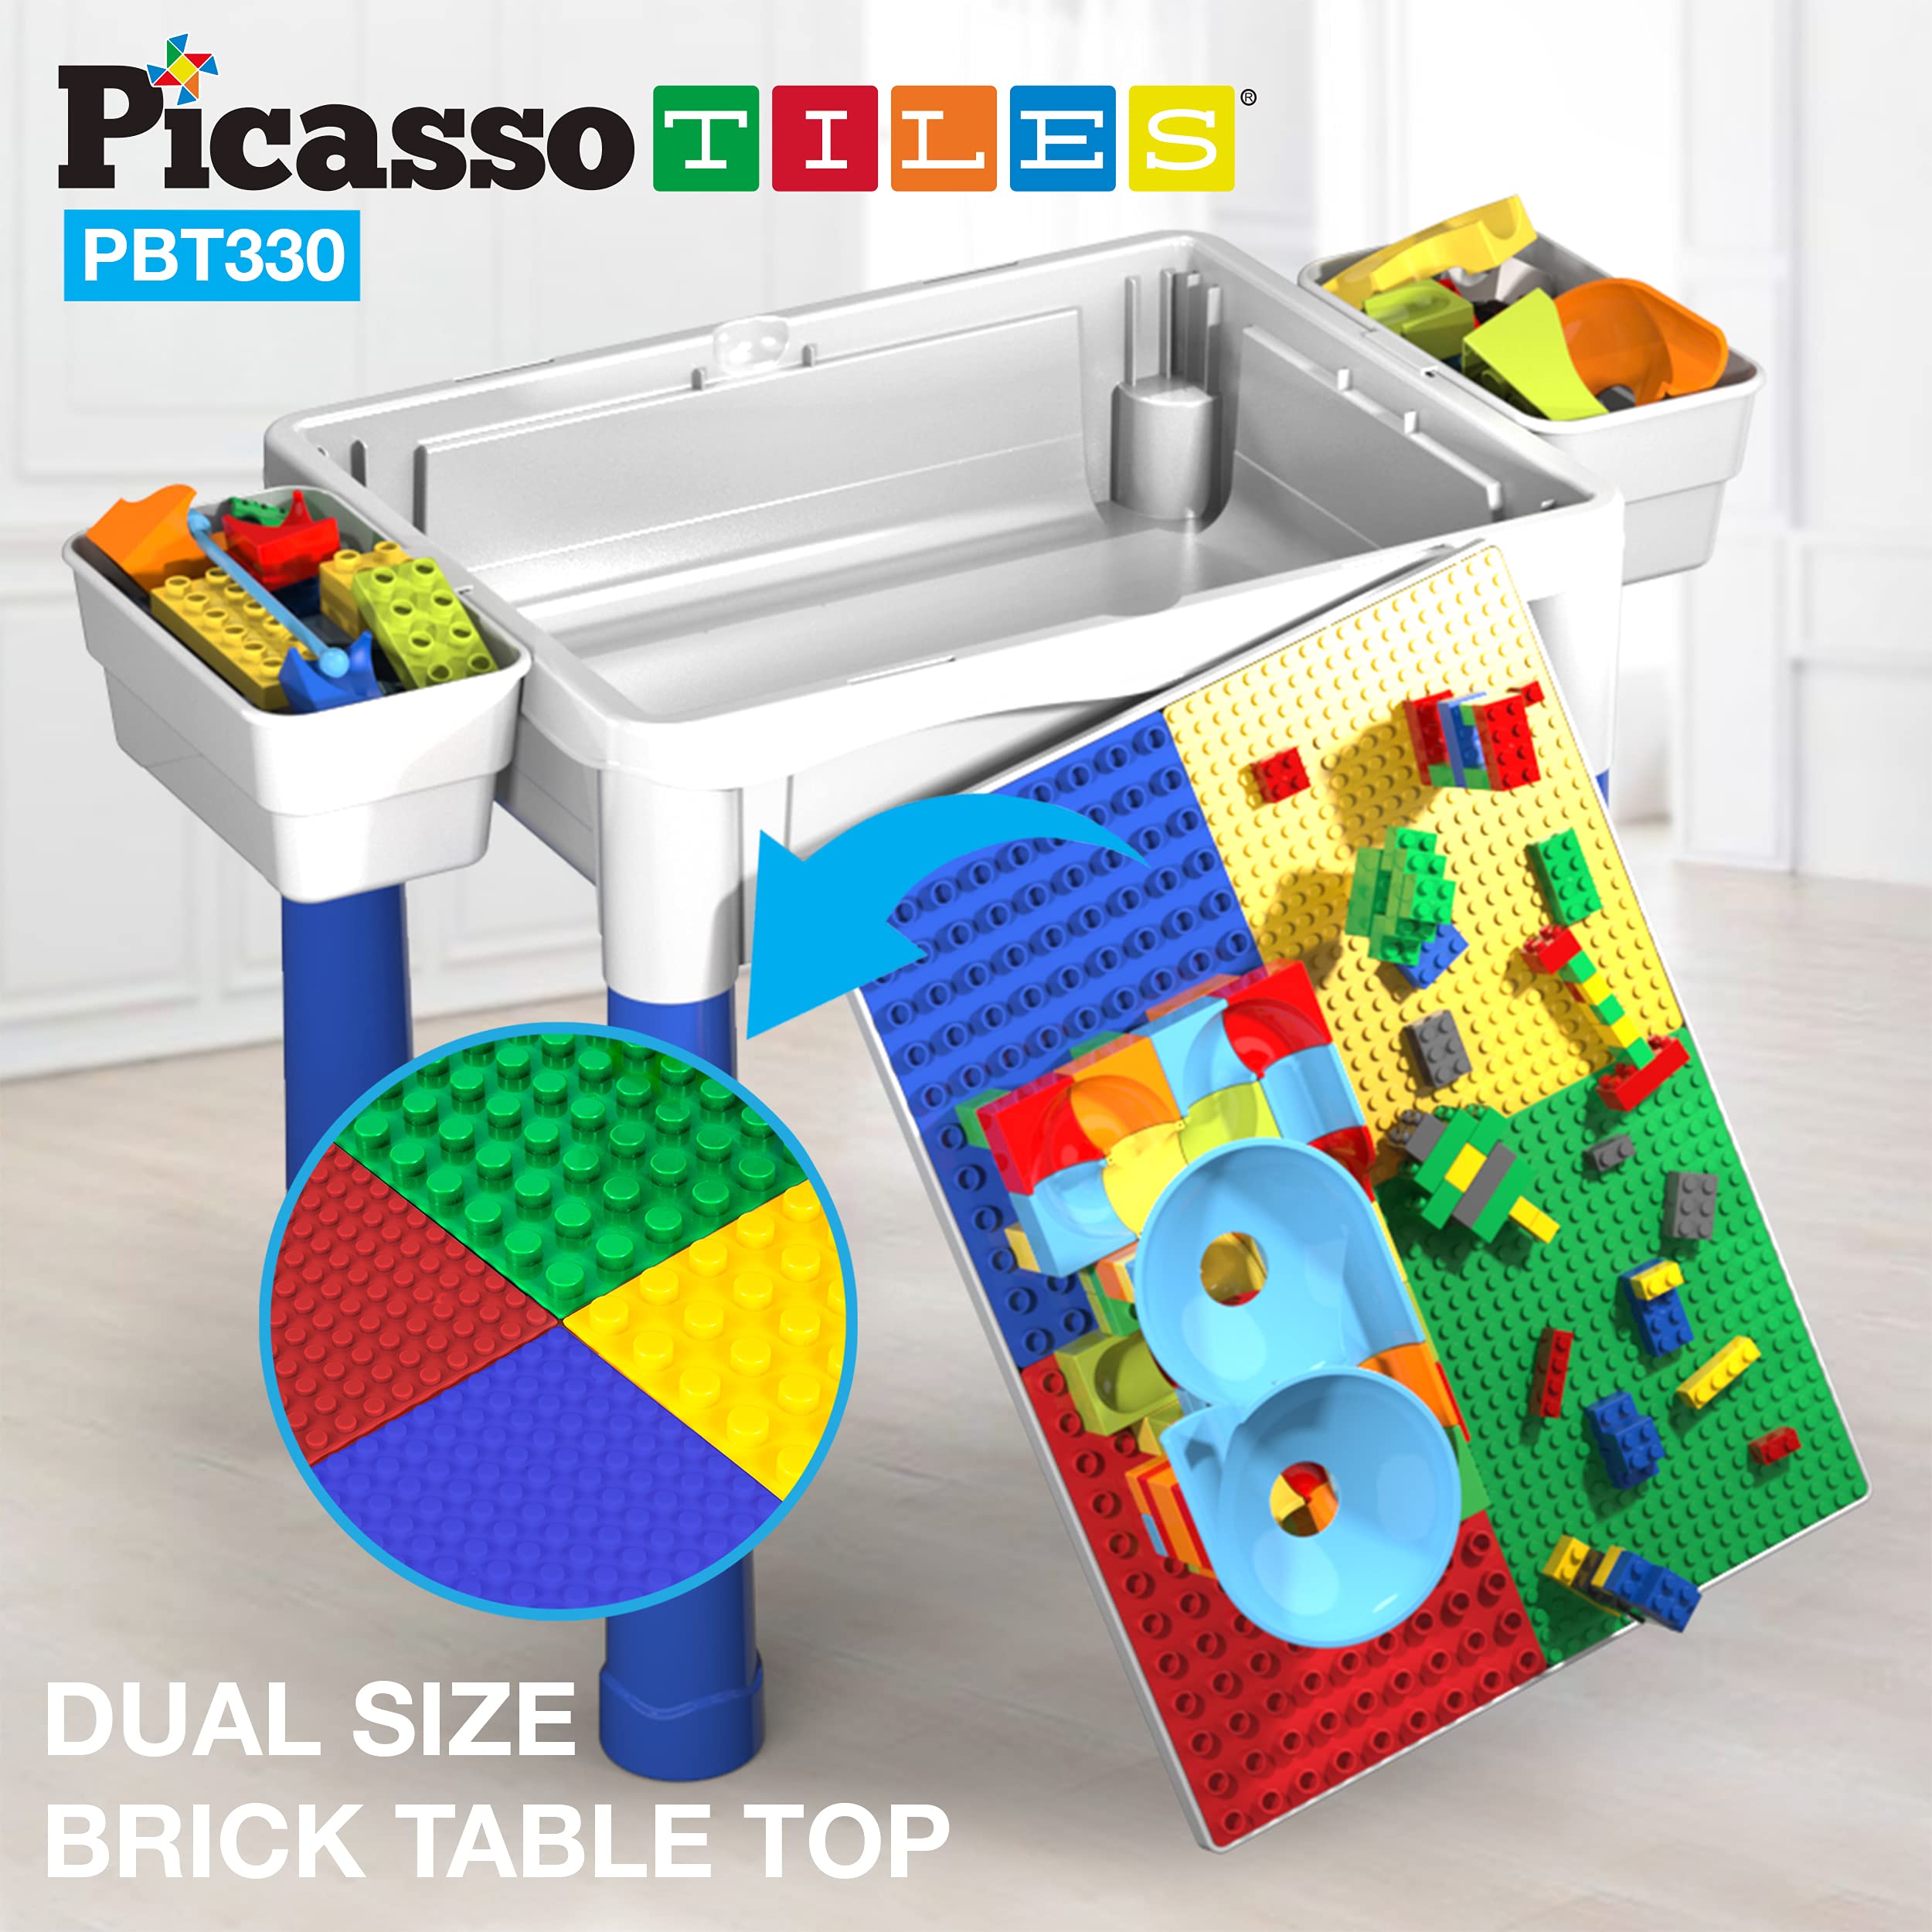 PicassoTiles Magnetic Action Figures + Activity Center Play, 4pc Character Pretend Playset, Study Desk Set Sandbox Water Tight Container Storage All-in-1 STEM Toy Kit 331pc Dual Size Blocks Marble Run